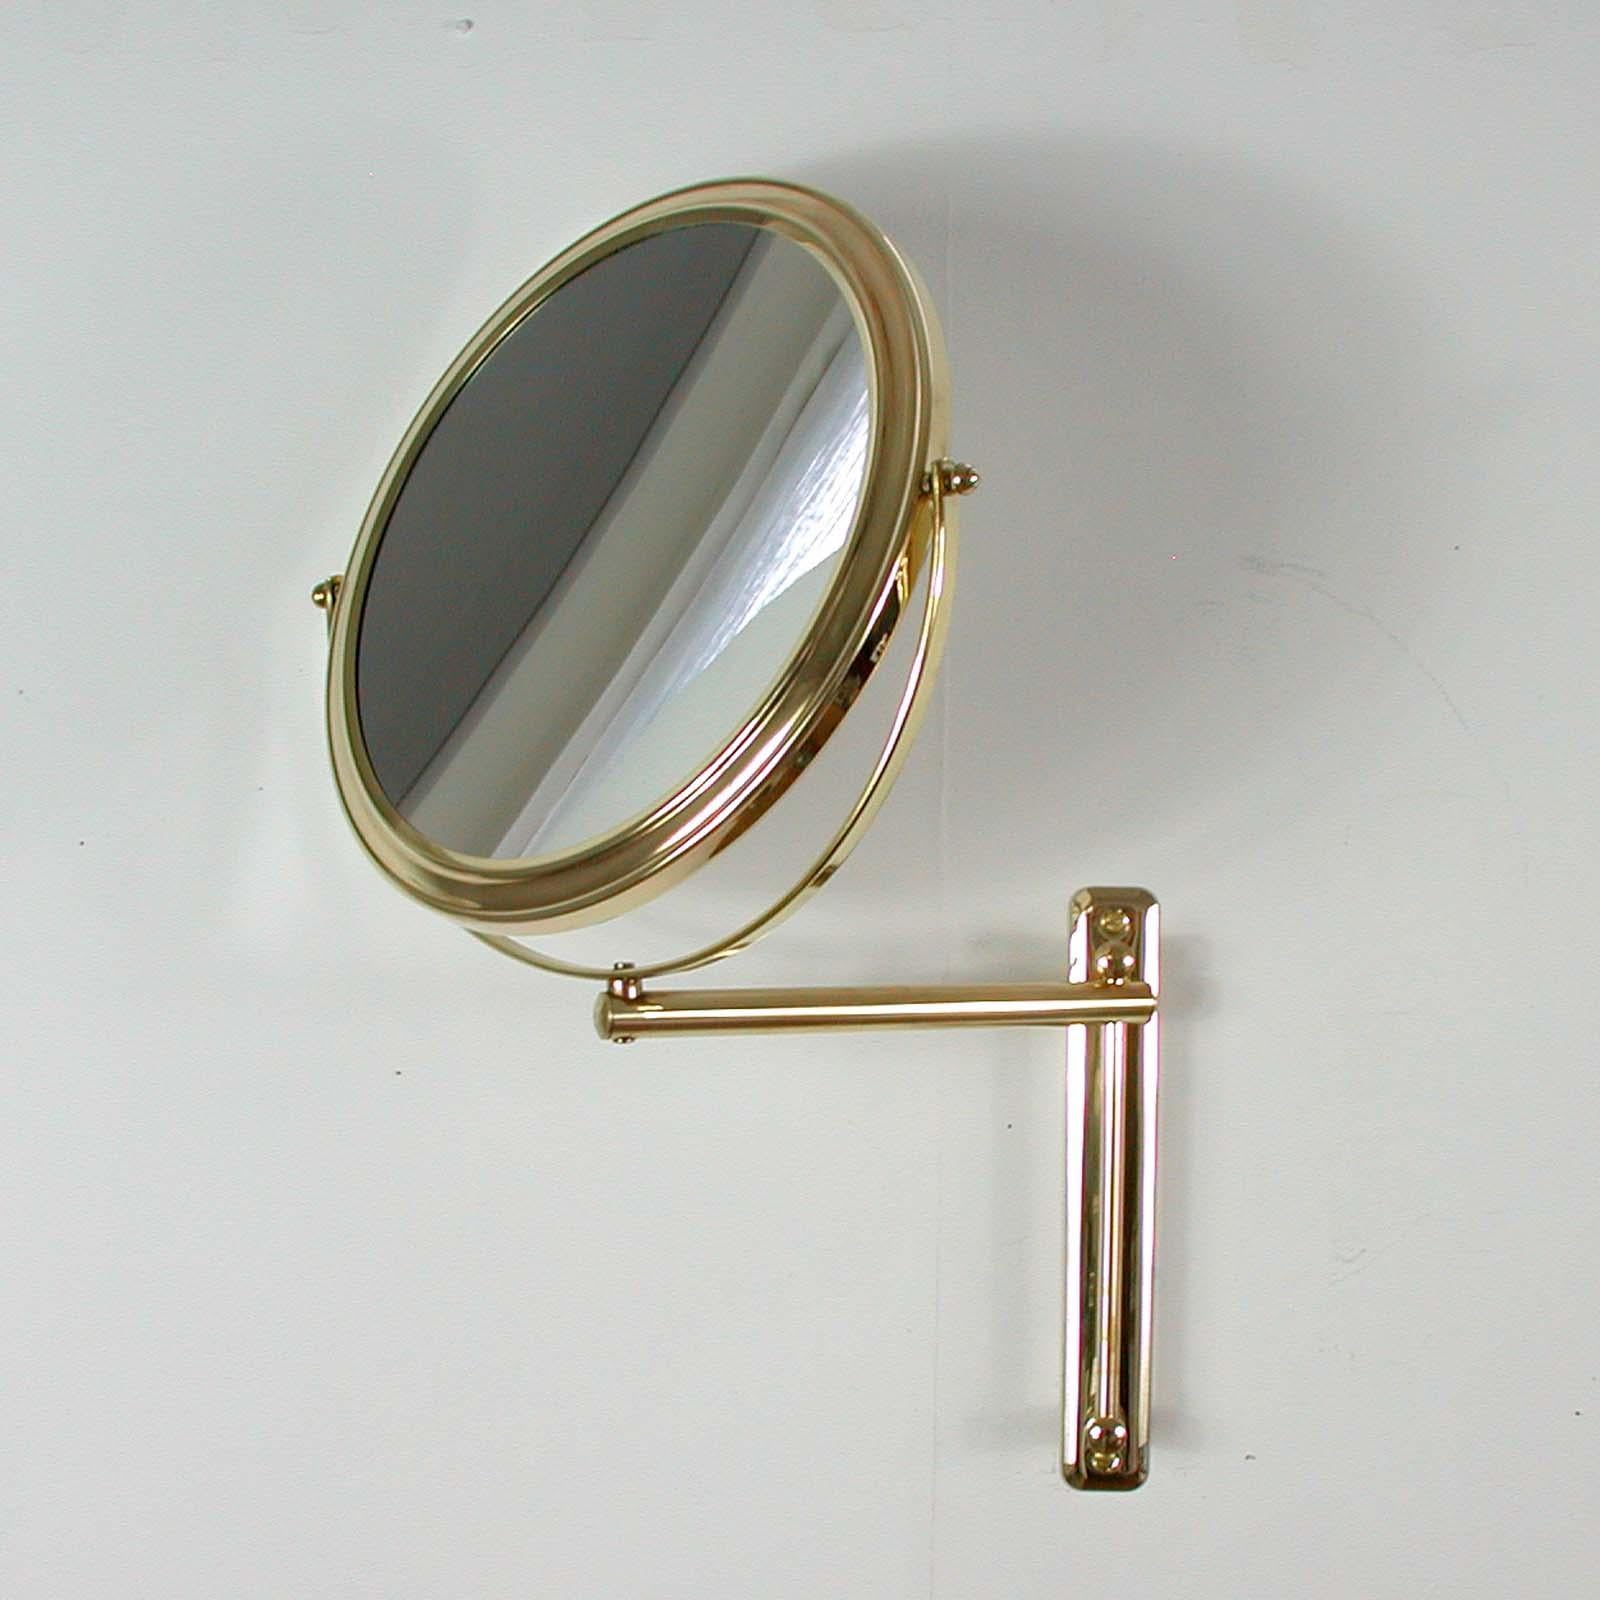 This elegant round vanity mirror was designed and manufactured in Italy in the 1950s-1960s. It has got a round brass frame and a brass wall arm. The mirror is height adjustable. It can also be turned from left to right and tilted.

It is a 2-sided